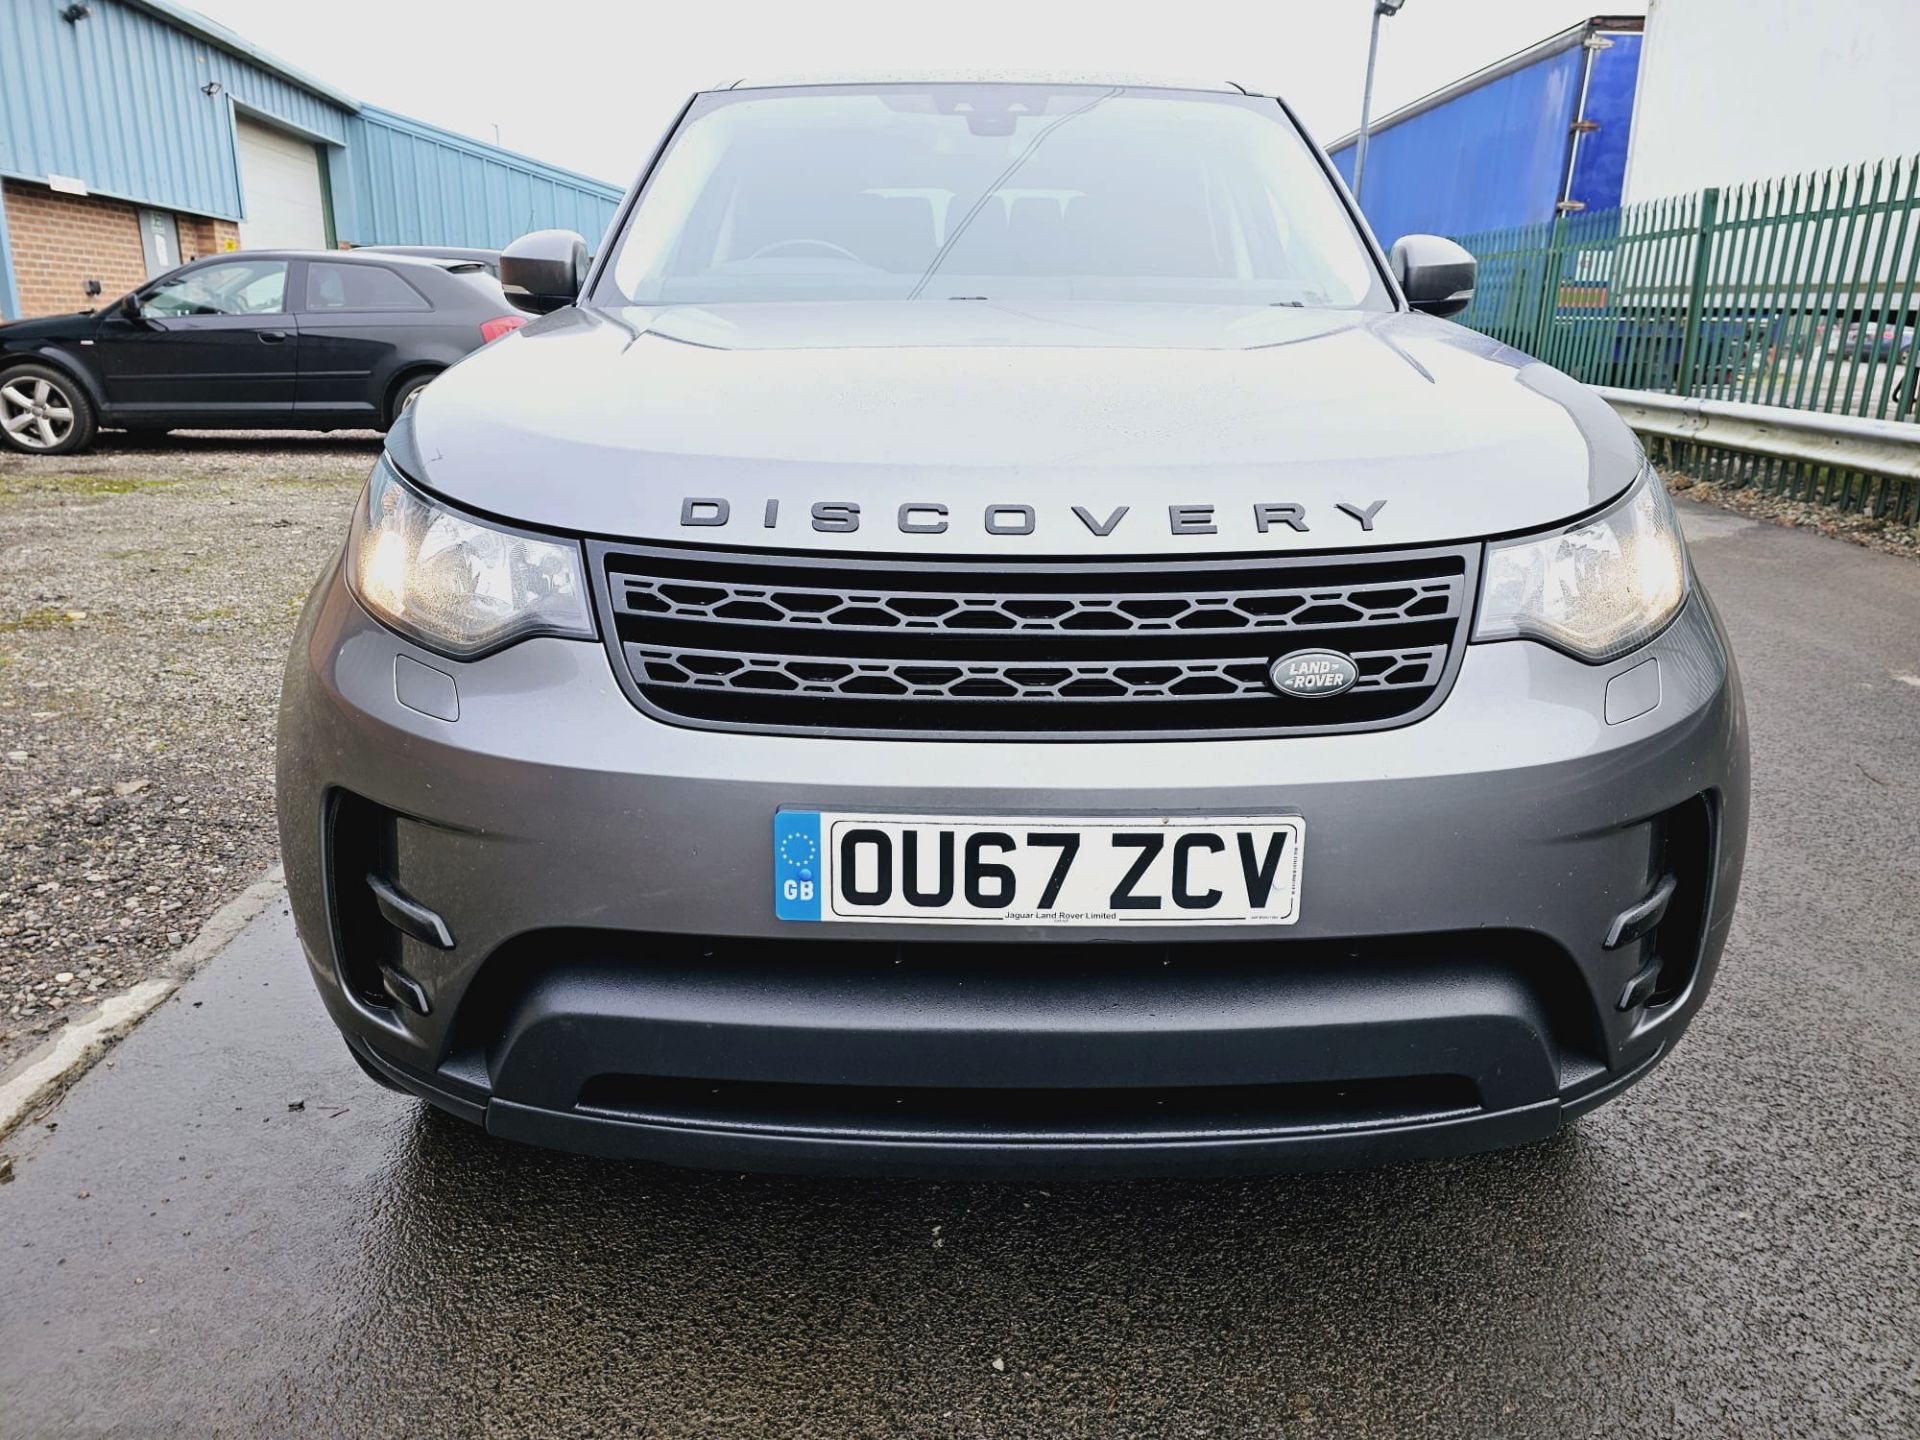 Land Rover Discovery 5 - (New Model) Diesel Auto - 2018 Model - Black Pack Edition - Sat Nav - Look - Image 5 of 45